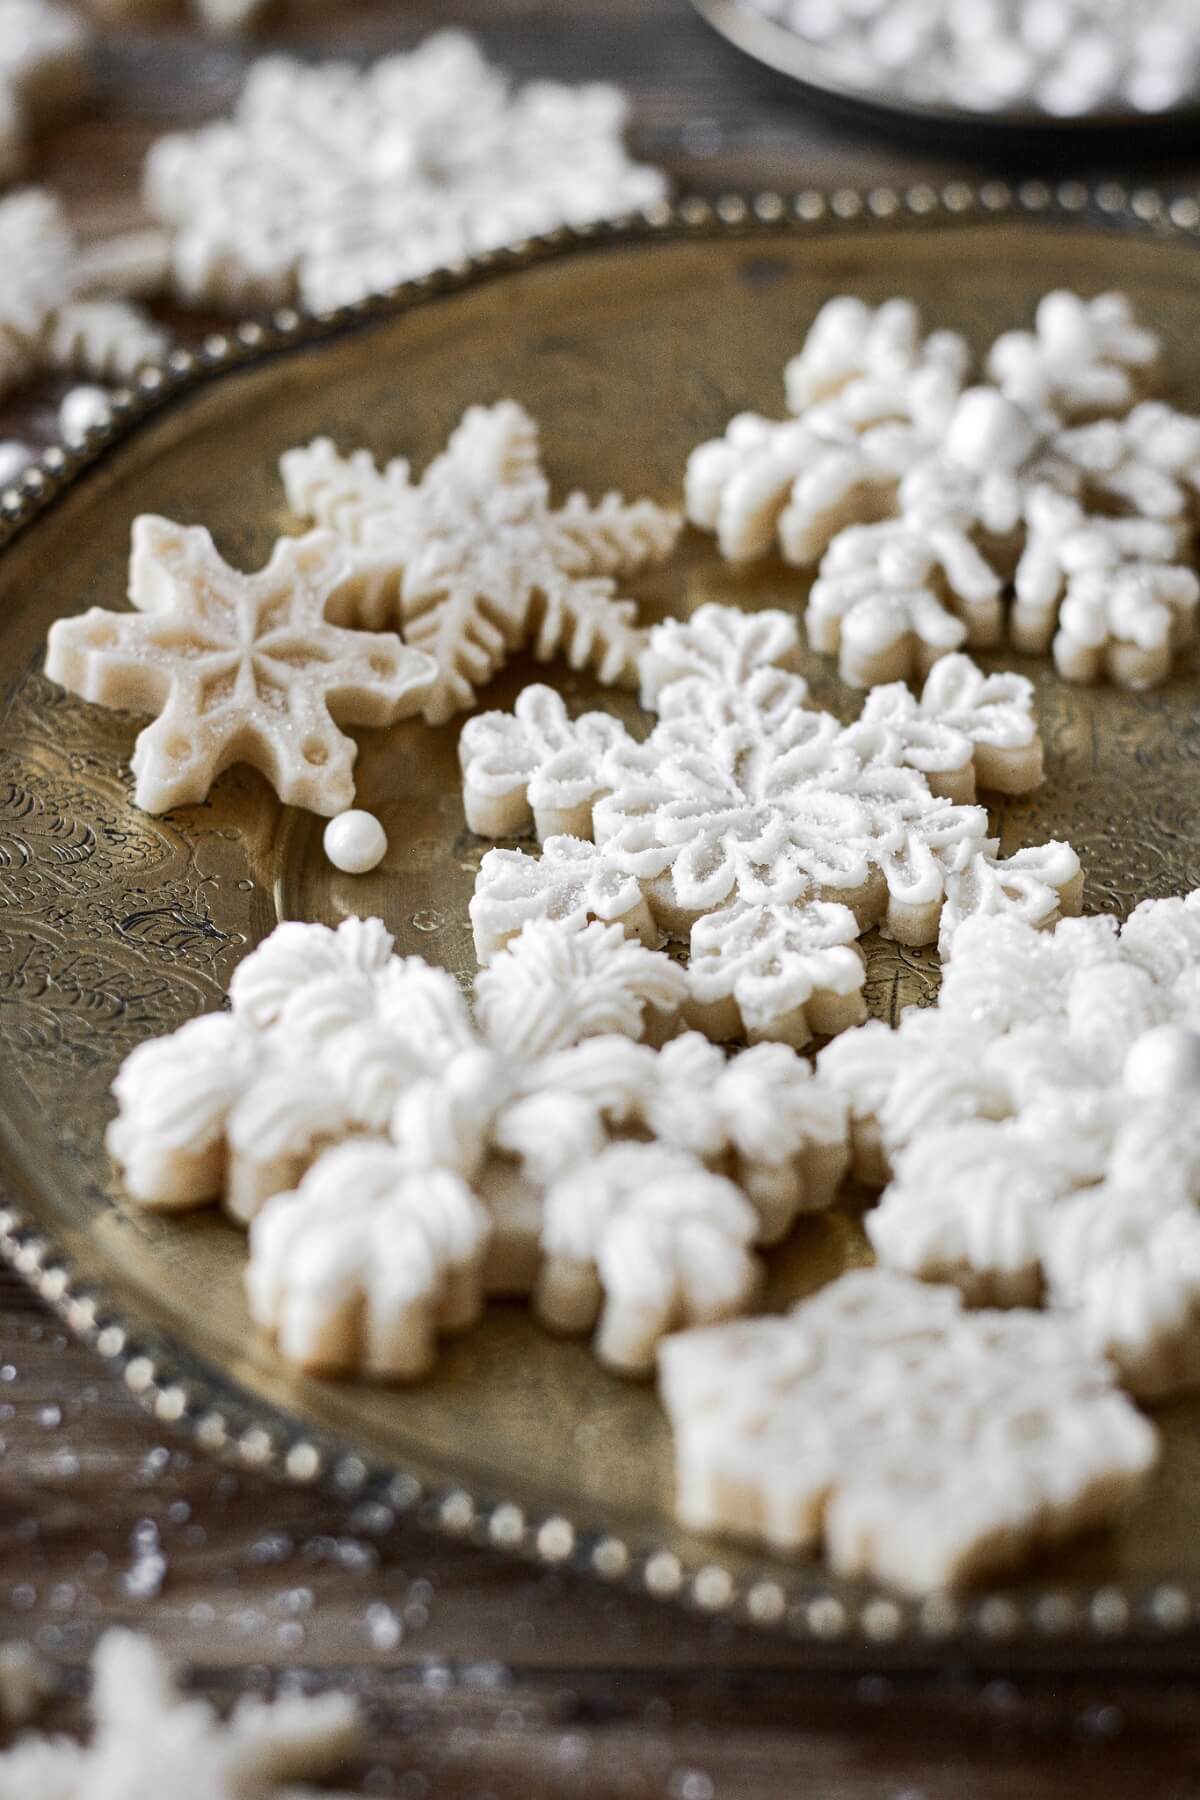 Buttercream frosting piped onto snowflake cookies.